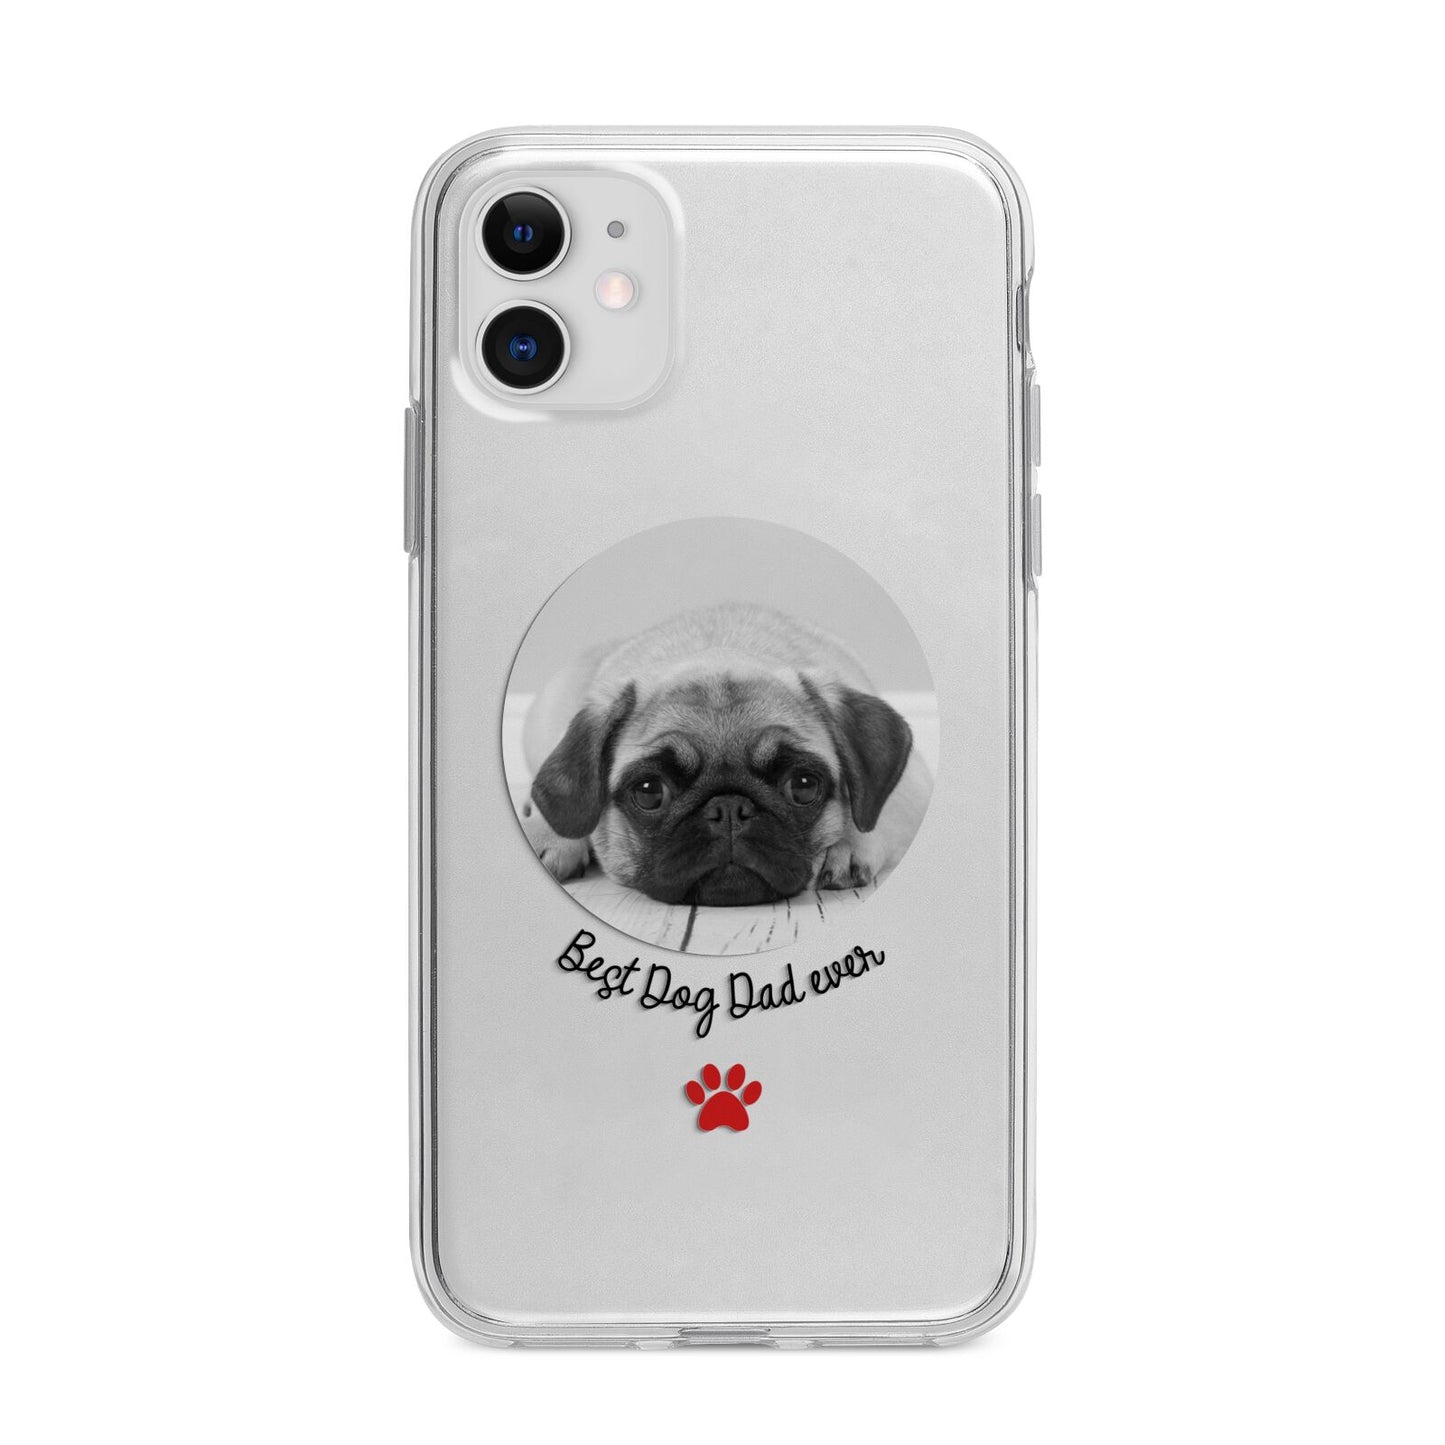 Best Dog Dad Ever Photo Upload Apple iPhone 11 in White with Bumper Case